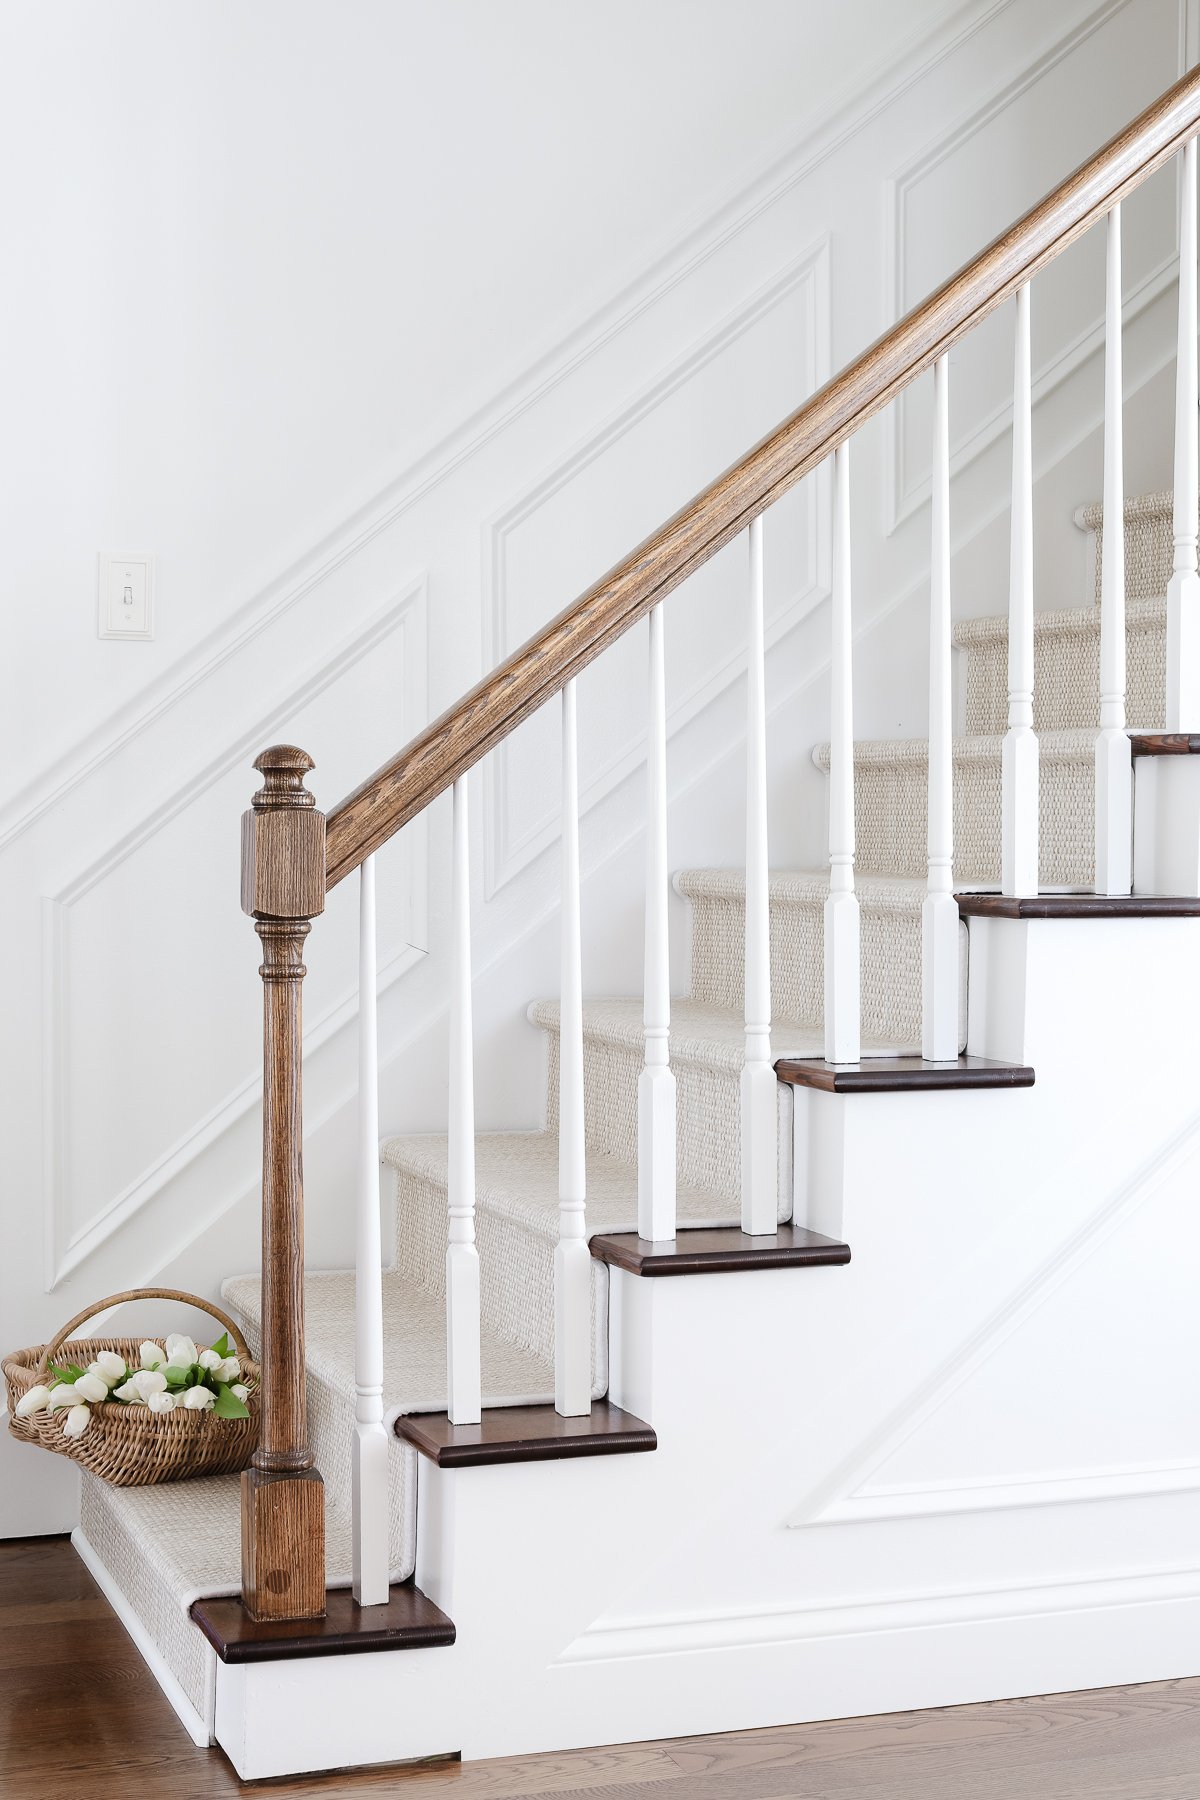 A wooden staircase with a diy stair runner.